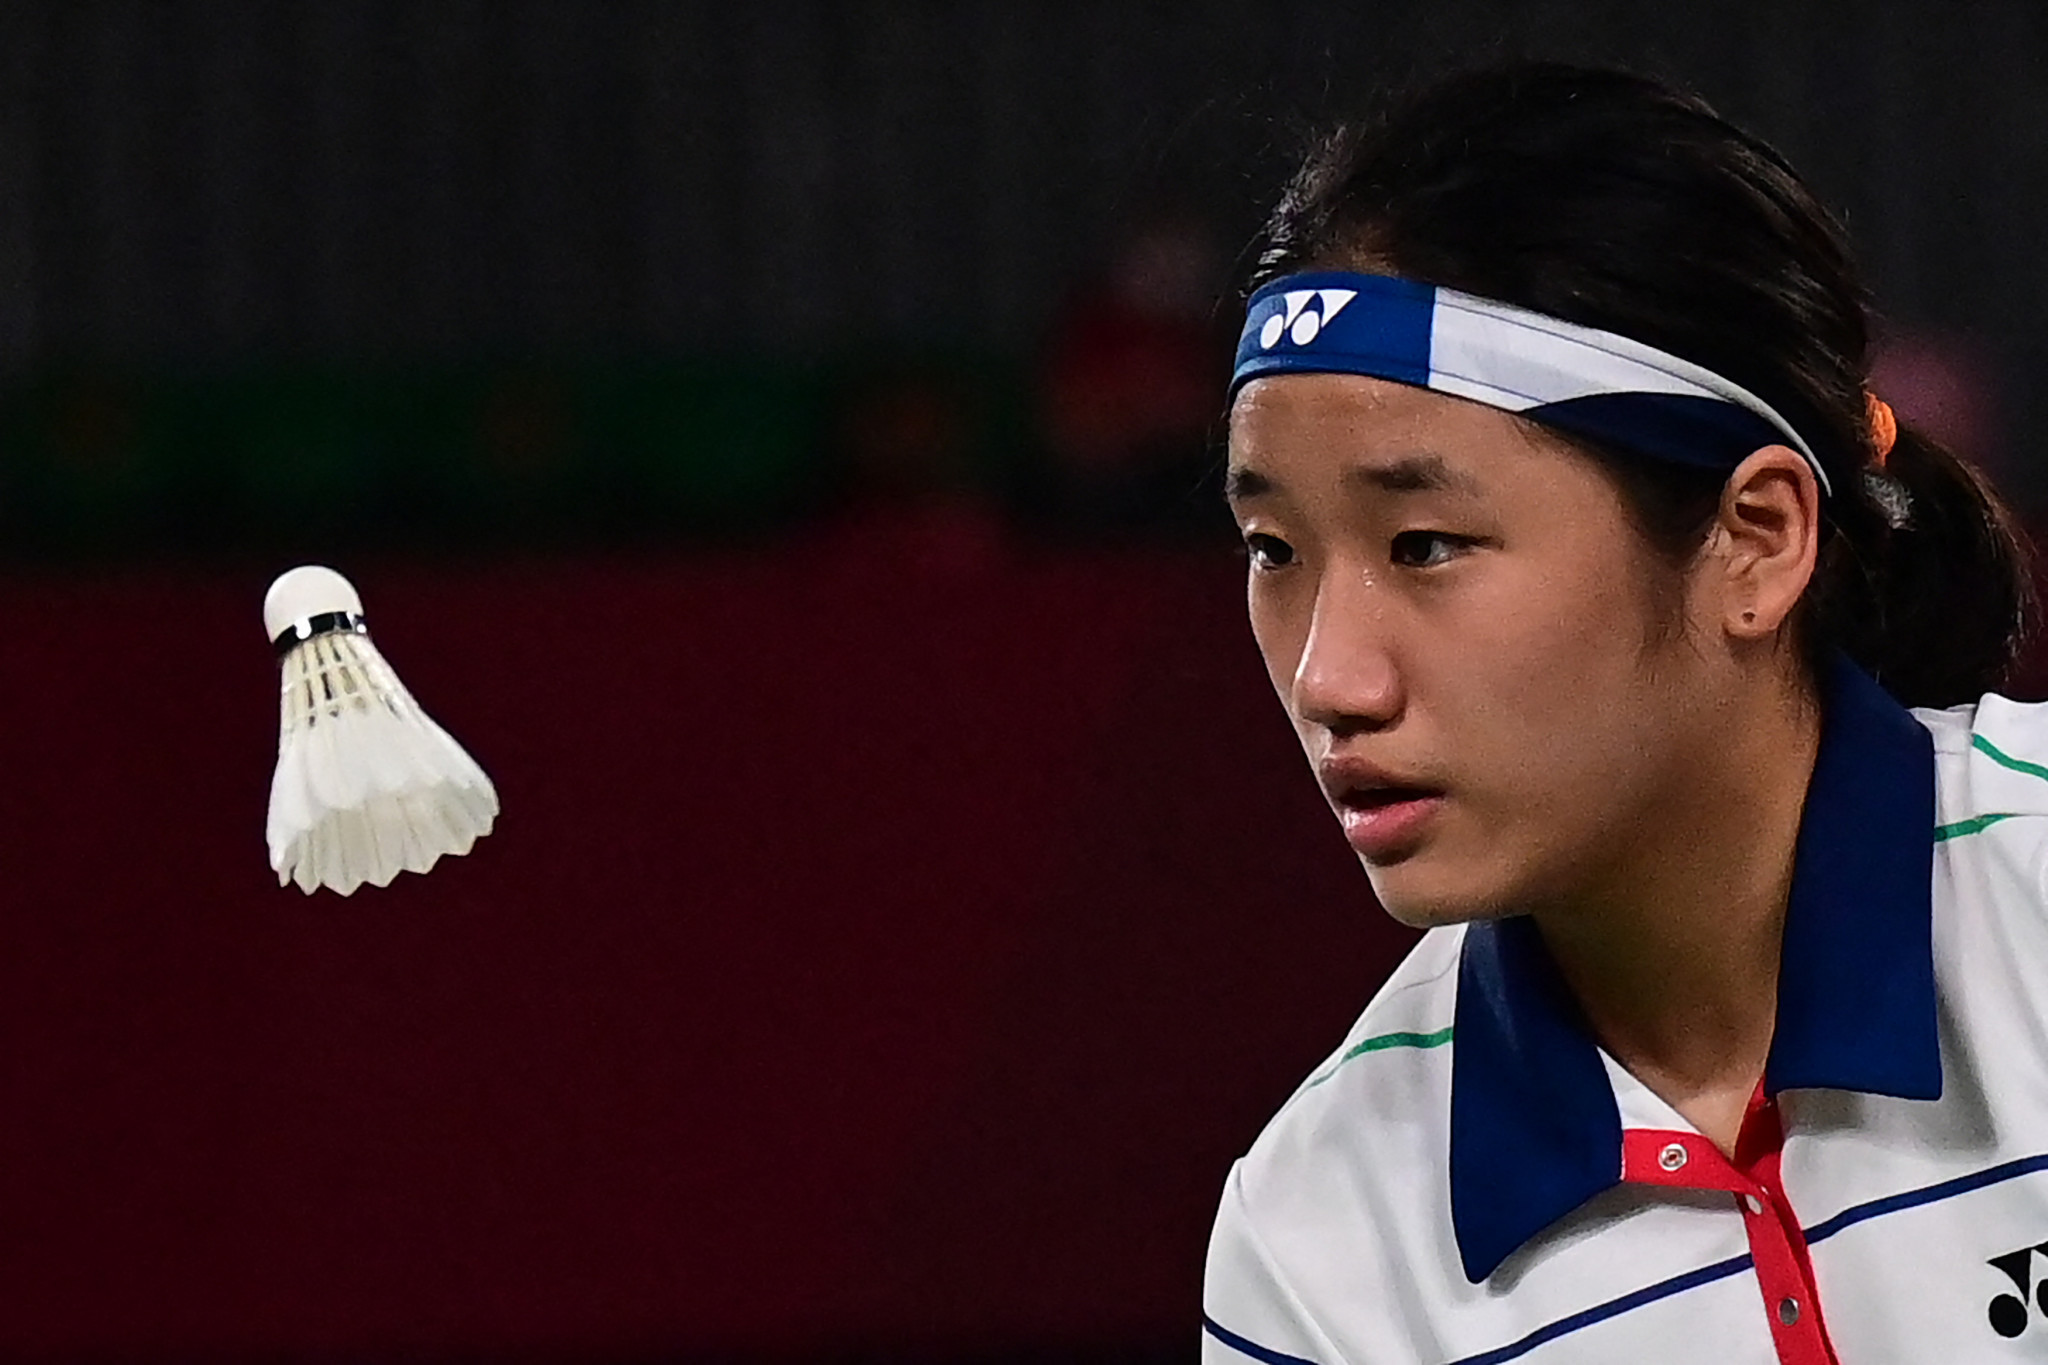 An Se-young booked her place into the Denmark Open women's singles final with a win over Kirsty Gilmour ©Getty Images